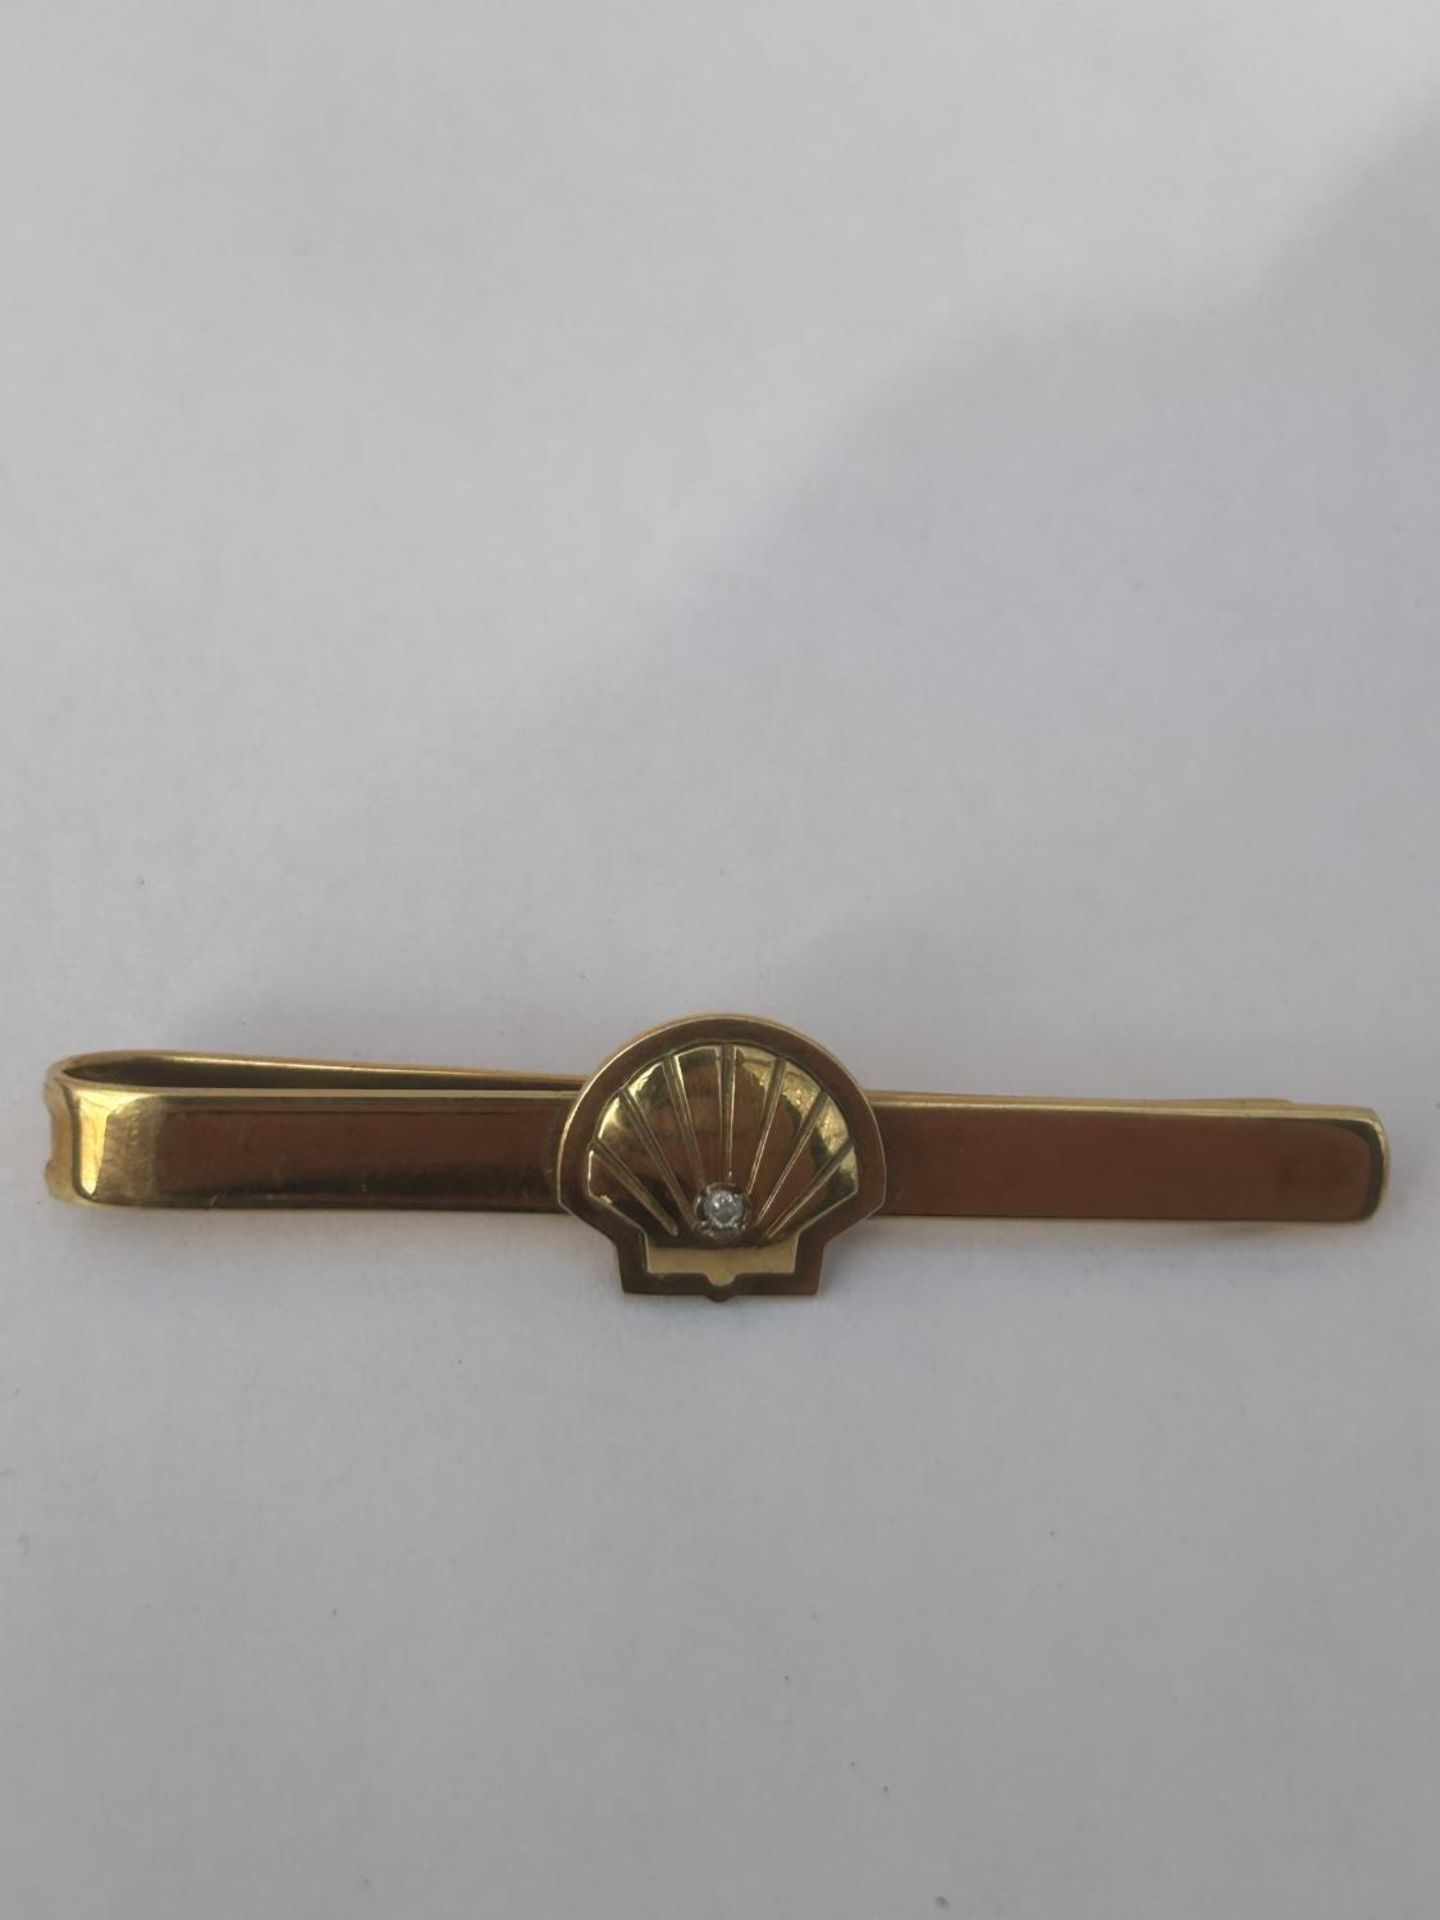 A FULLY HALLMARKED BIRMINGHAM 9CT GOLD AND DIAMOND SHELL PETROLEUM TIE PIN, WEIGHT 10 G